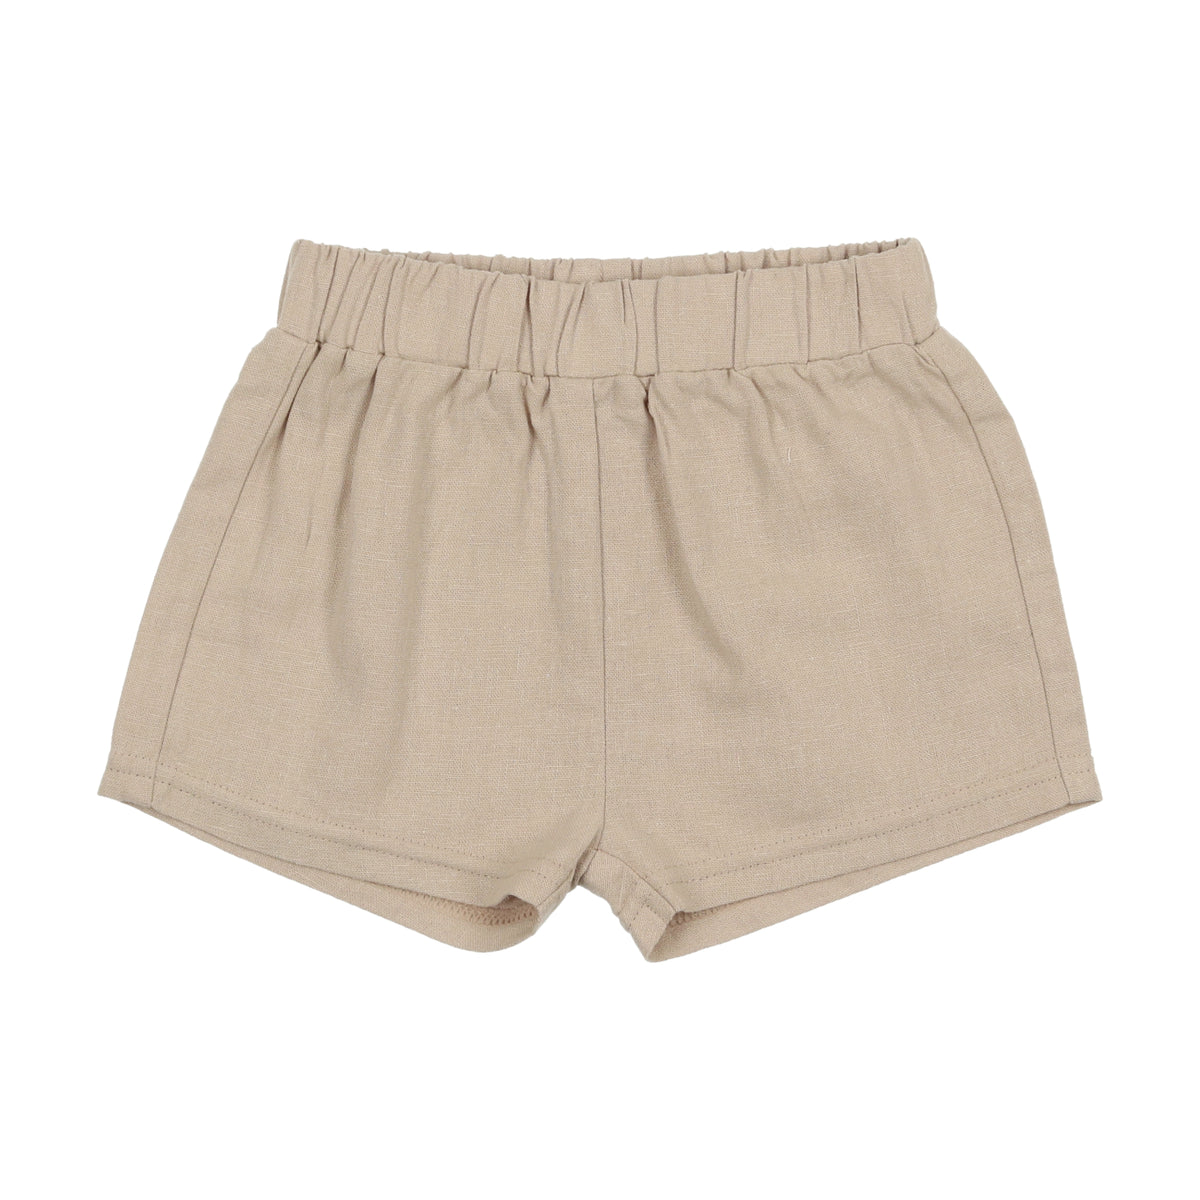 Buy Only & Sons Linus Shorts Silver Lining - Scandinavian Fashion